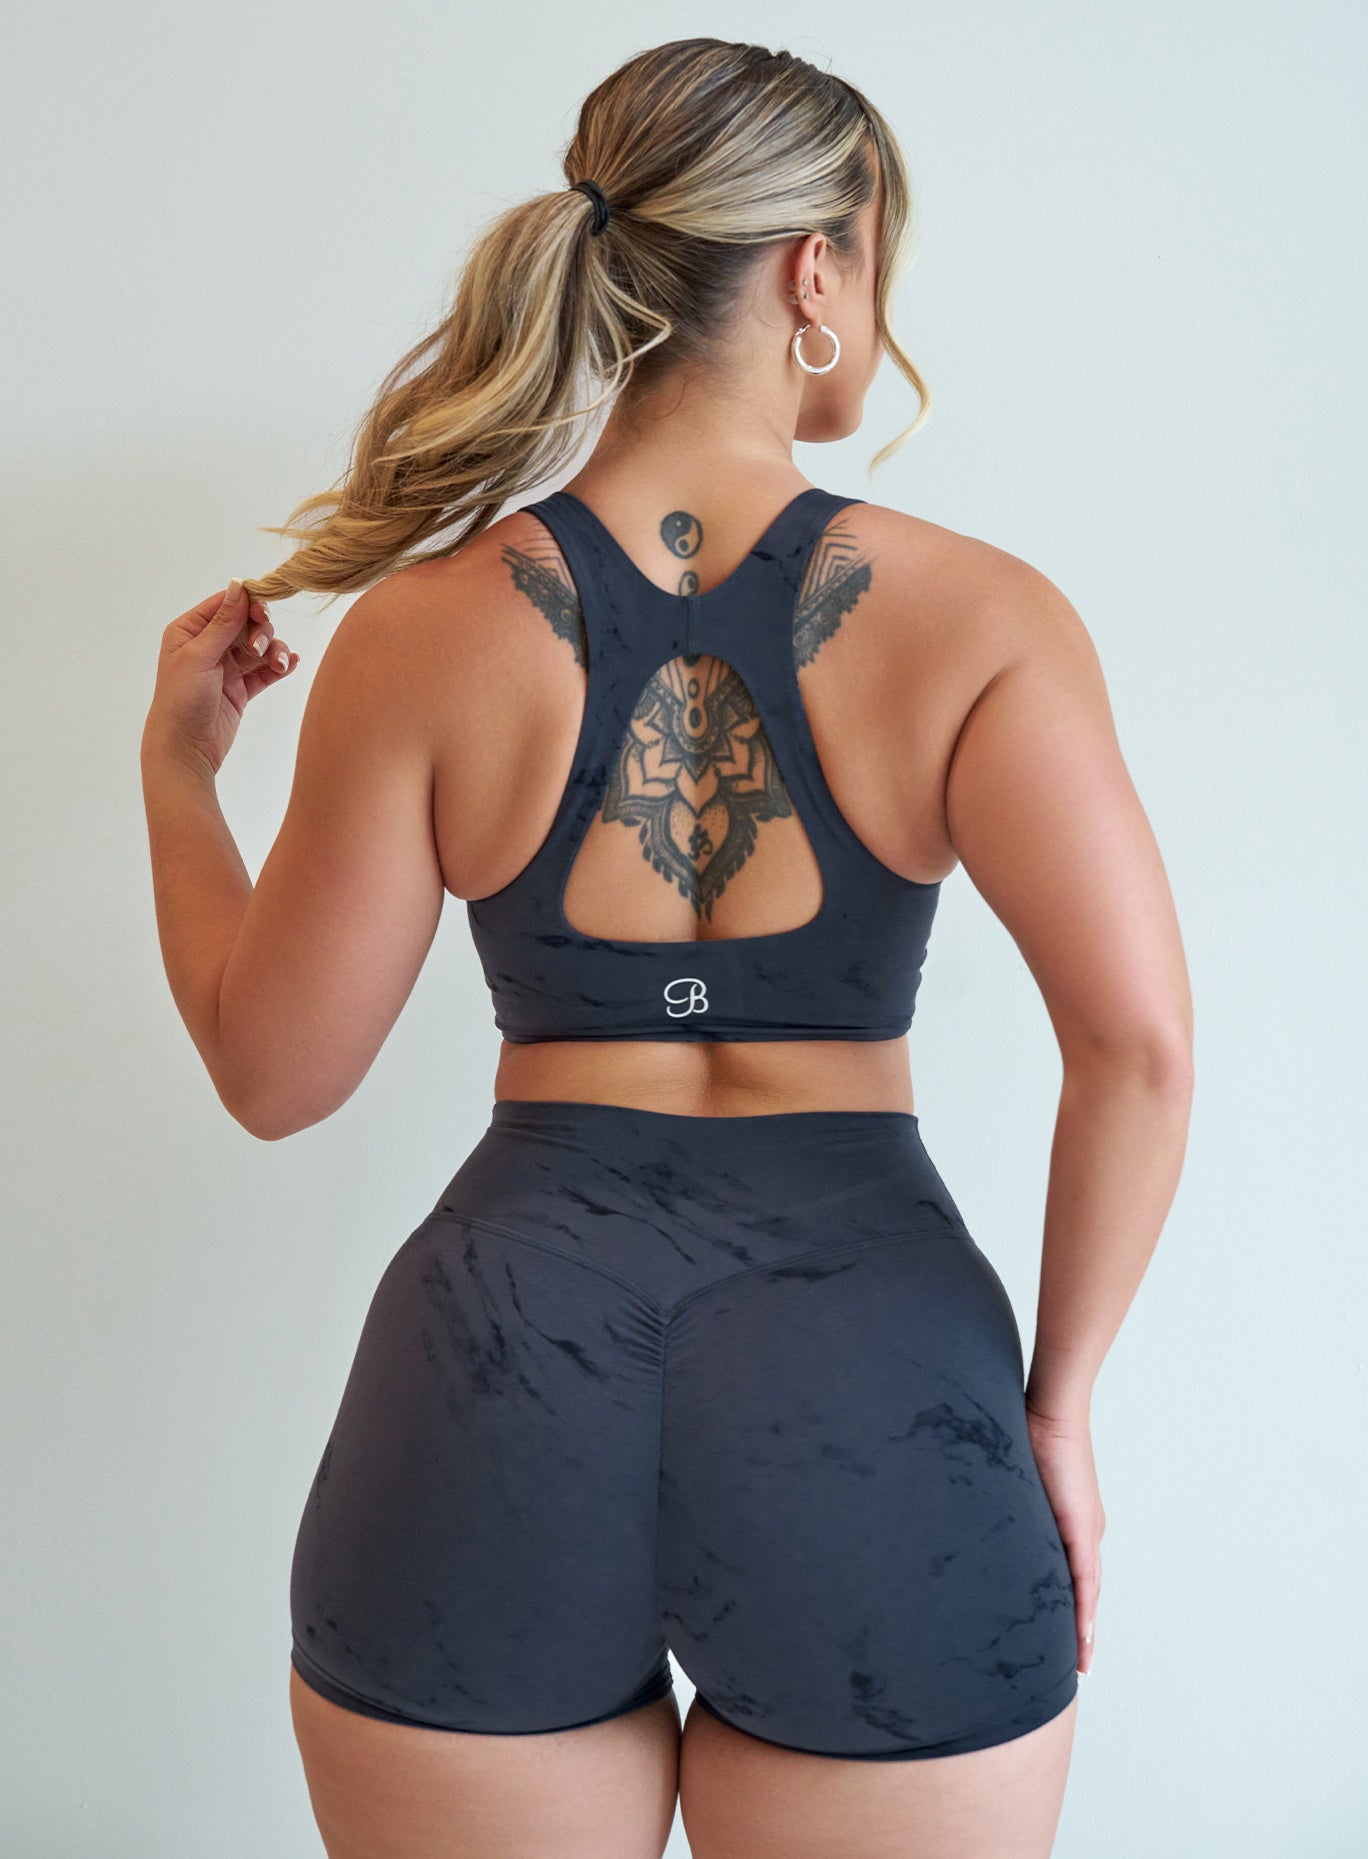 Back profile view of our model holding the tip of her ponytail wearing our Square Neck Bra in Thunder Gray color  along with the matching shorts